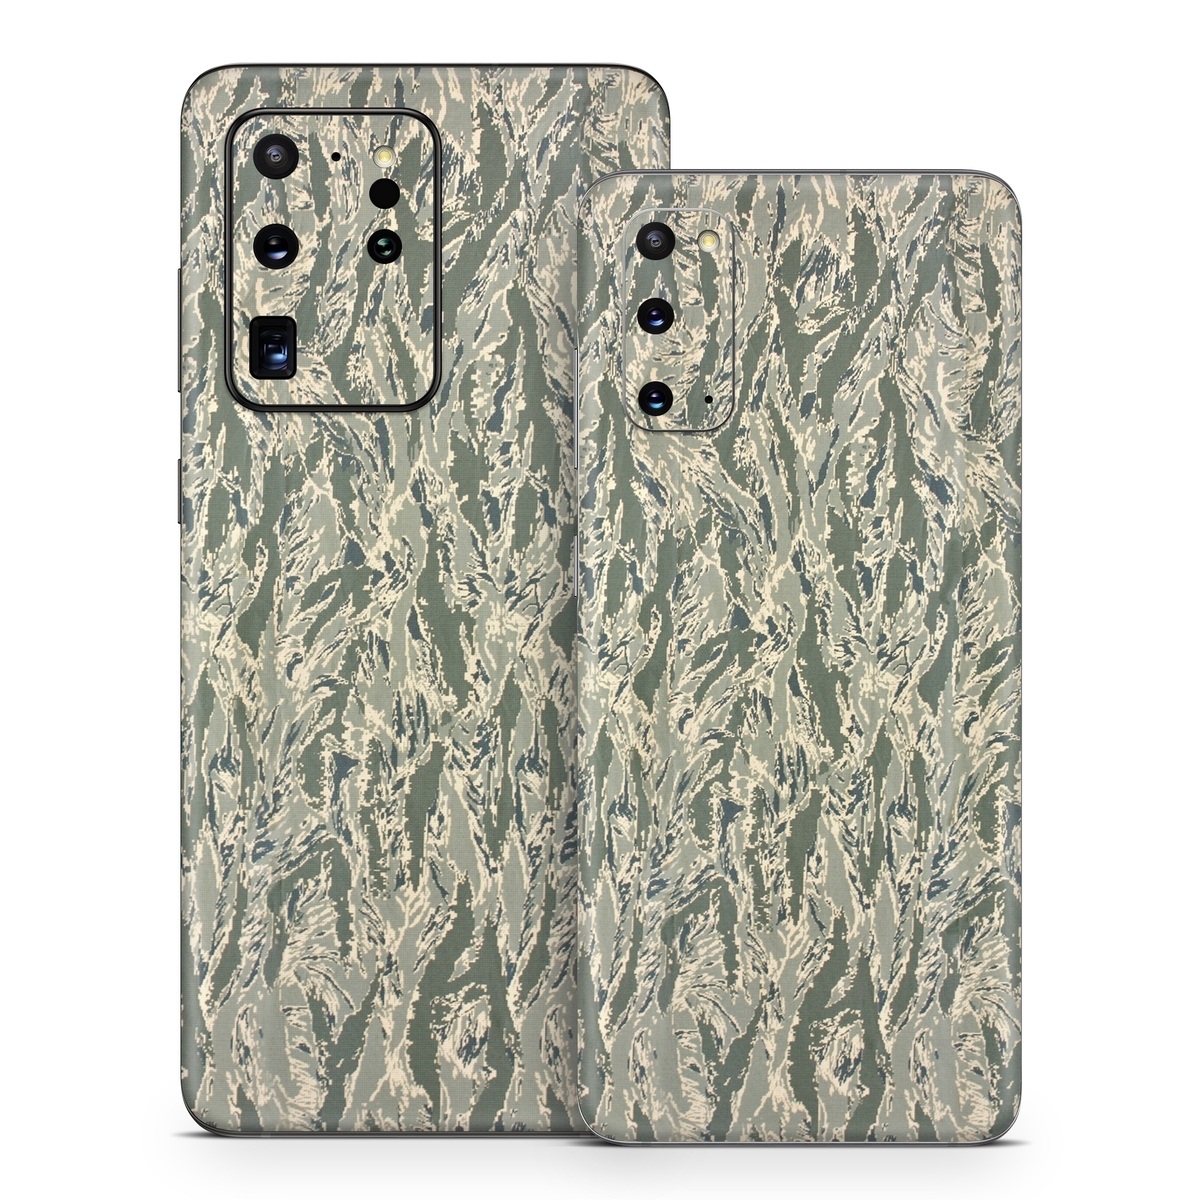 Samsung Galaxy S20 Series Skin design of Pattern, Grass, Plant, with gray, green colors